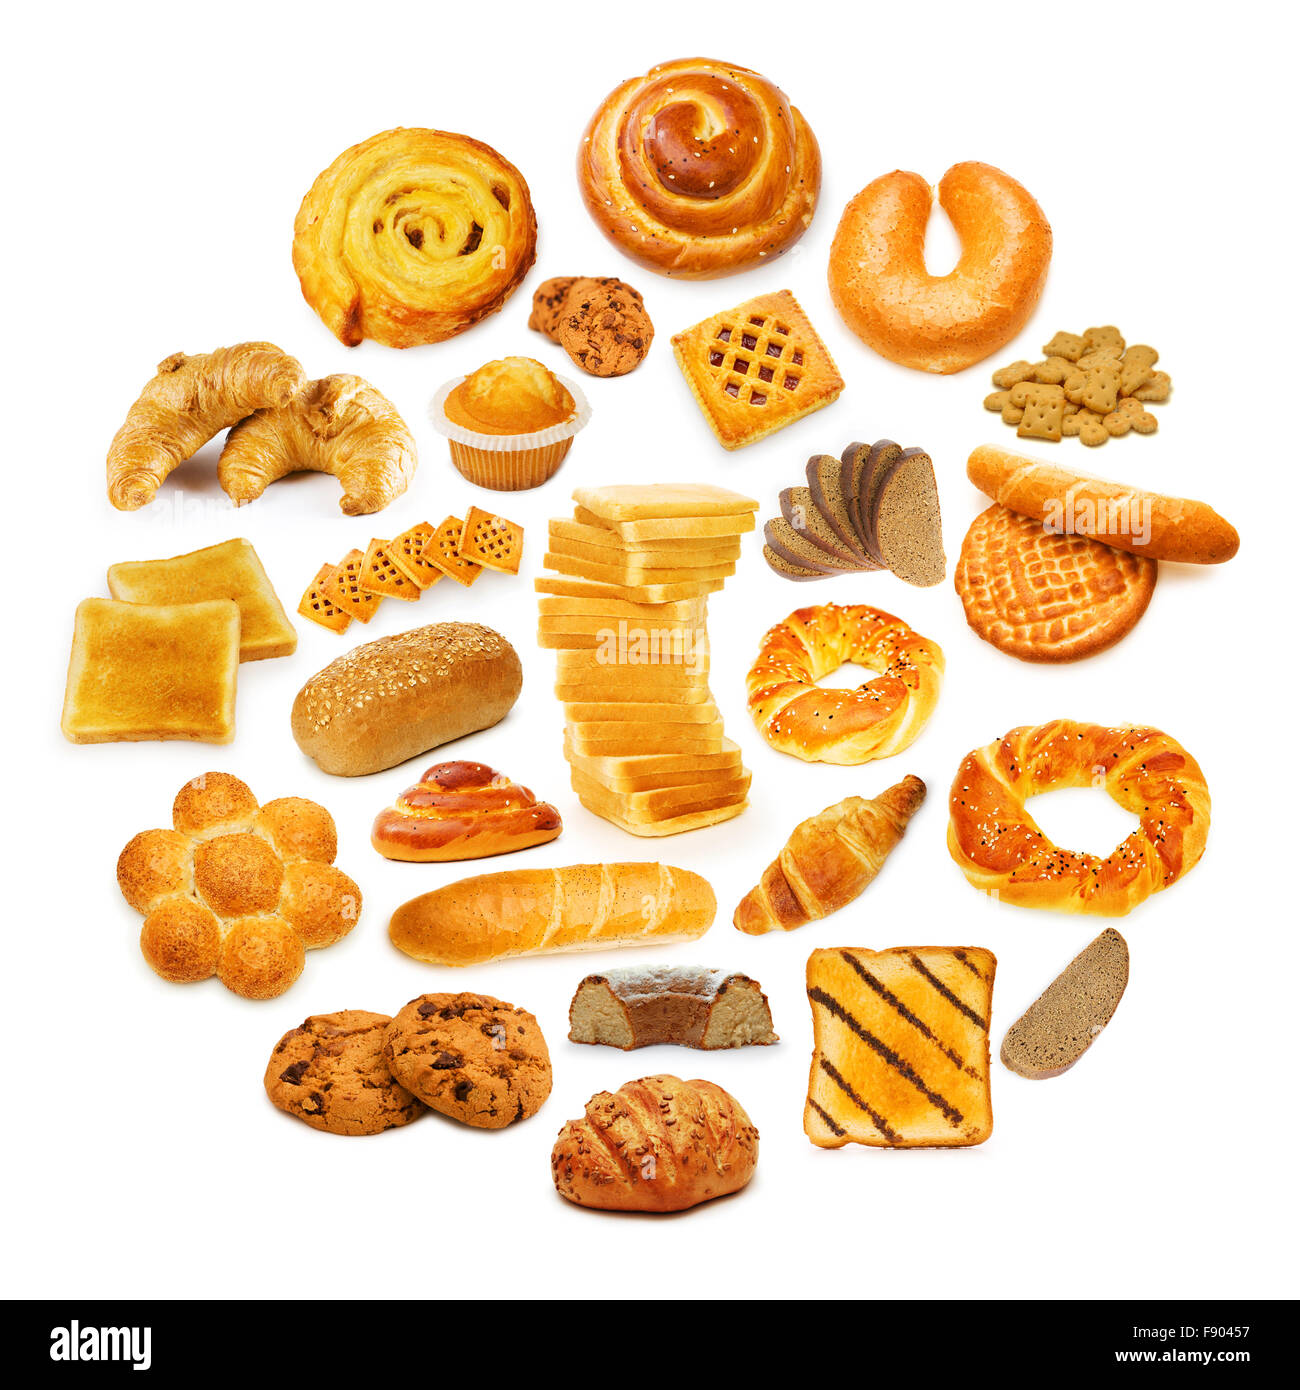 Circle with lots of food items Stock Photo